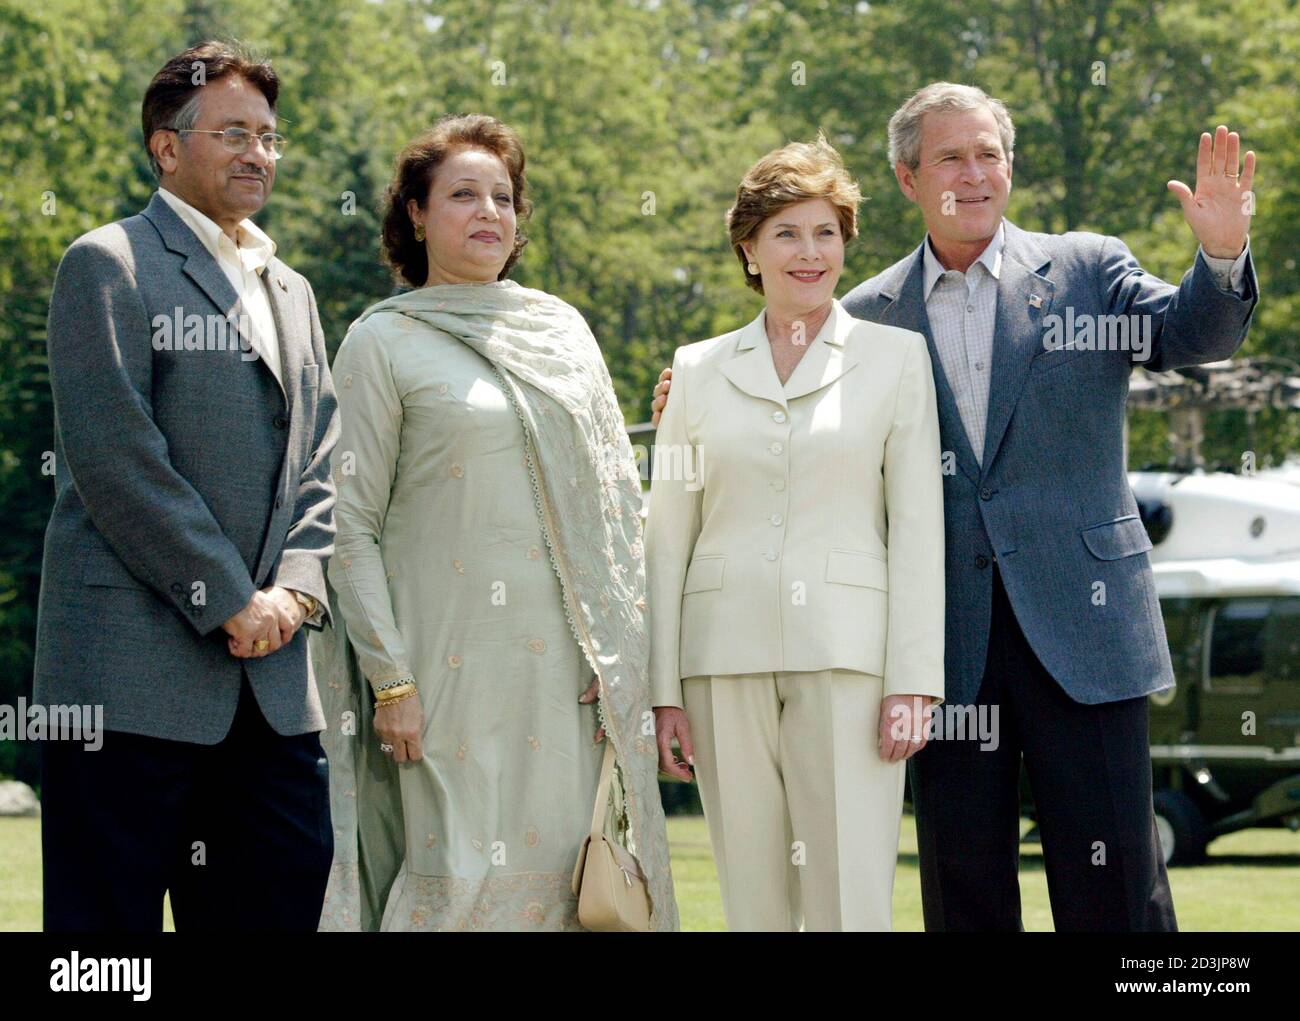 U.S. President George W. Bush and first lady Laura Bush (2nd R) pose for a  picture with Pakistan's President, General Pervez Musharraf (L) and his  wife Sehba at the end of a